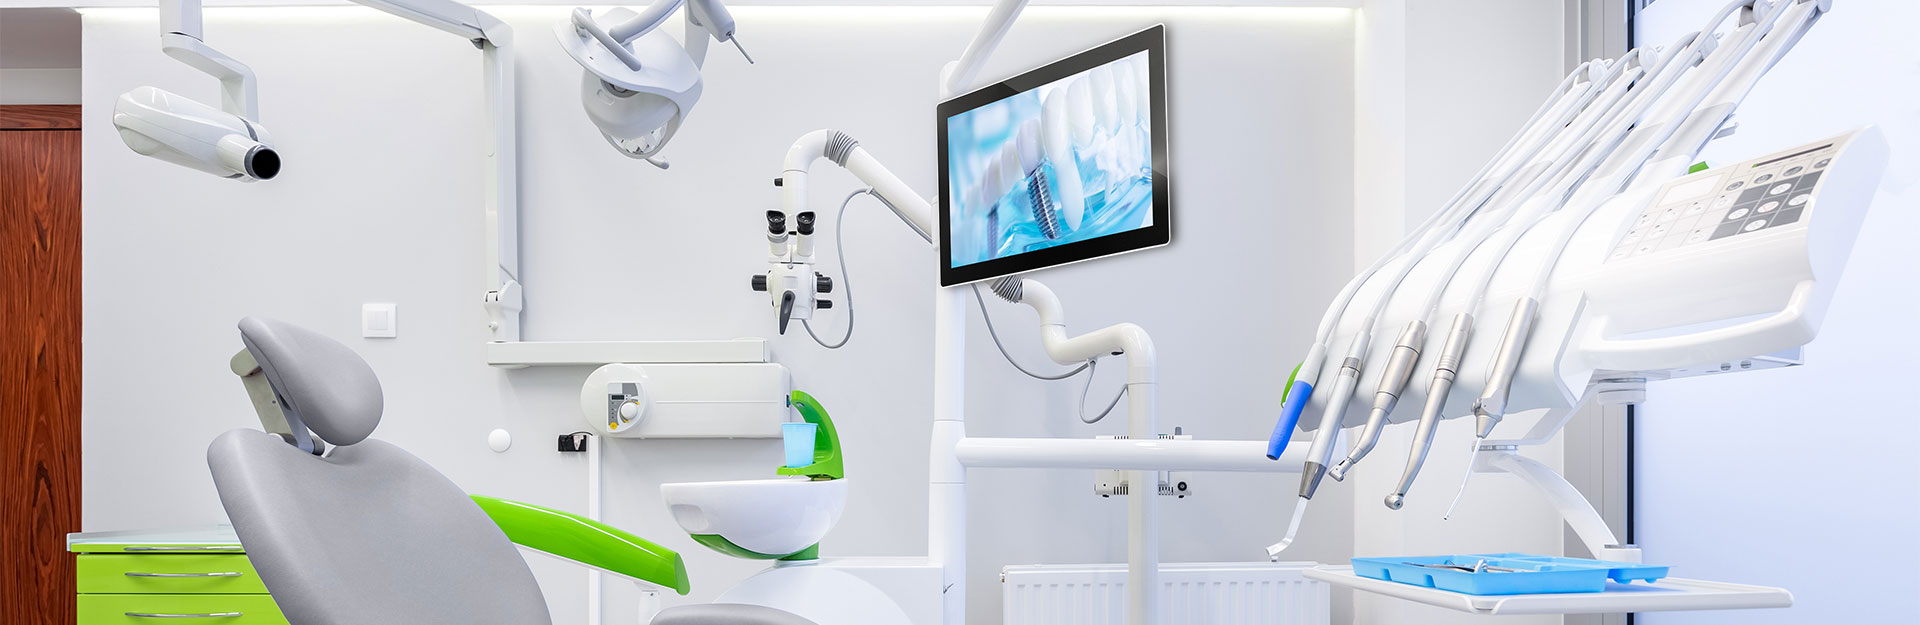 Displays / Monitors in Applications: Dental Treatment Chair